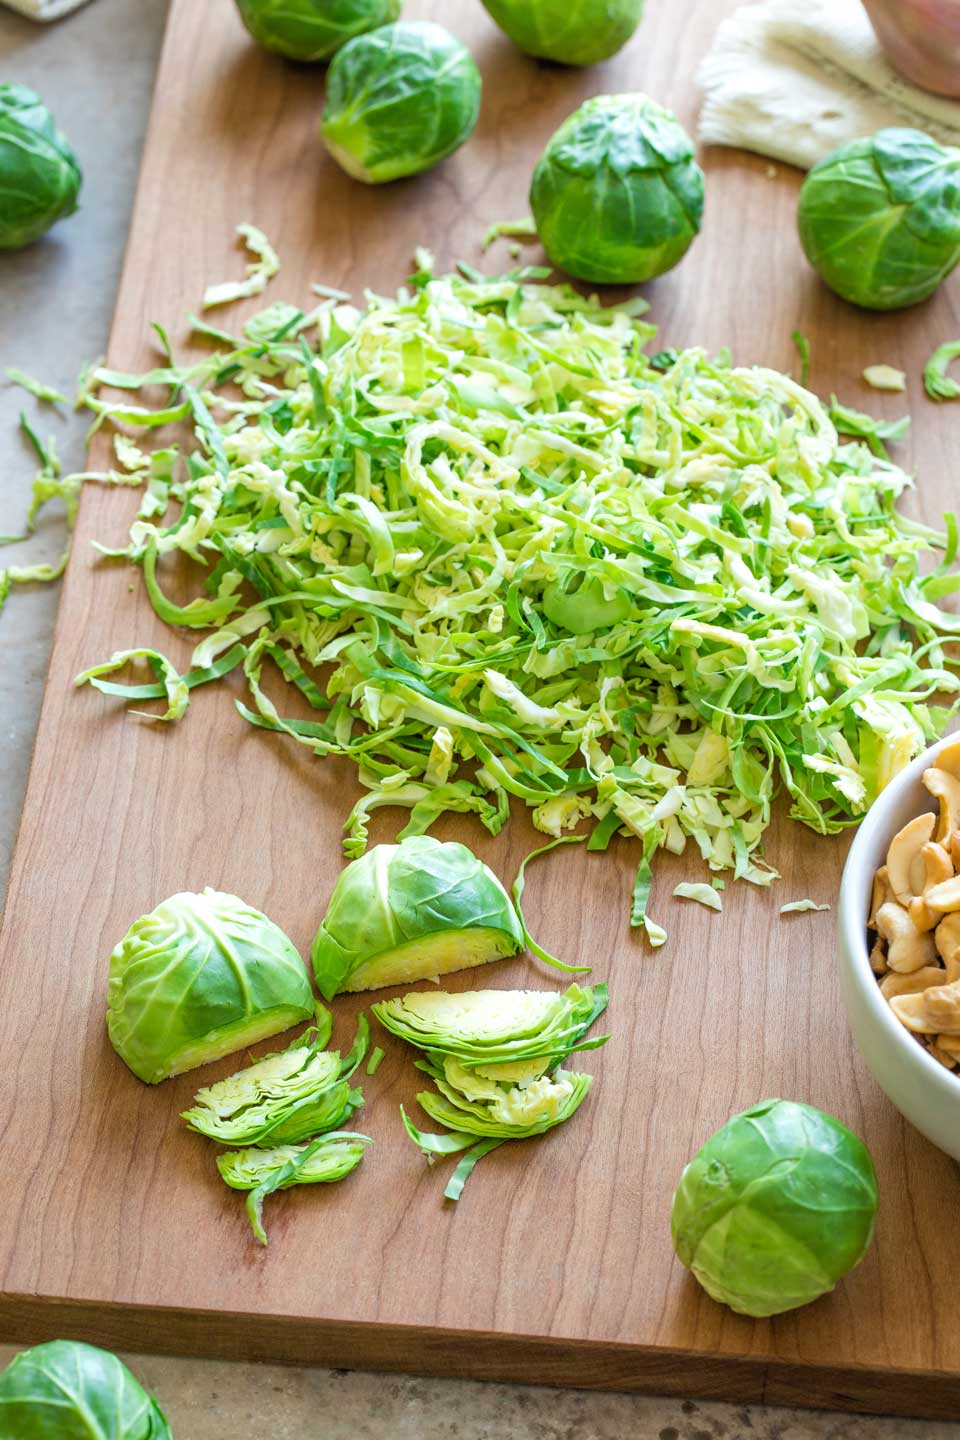 A pile of shredded Brussel sprouts, with two sprouts partially cut, showing how to shred them.